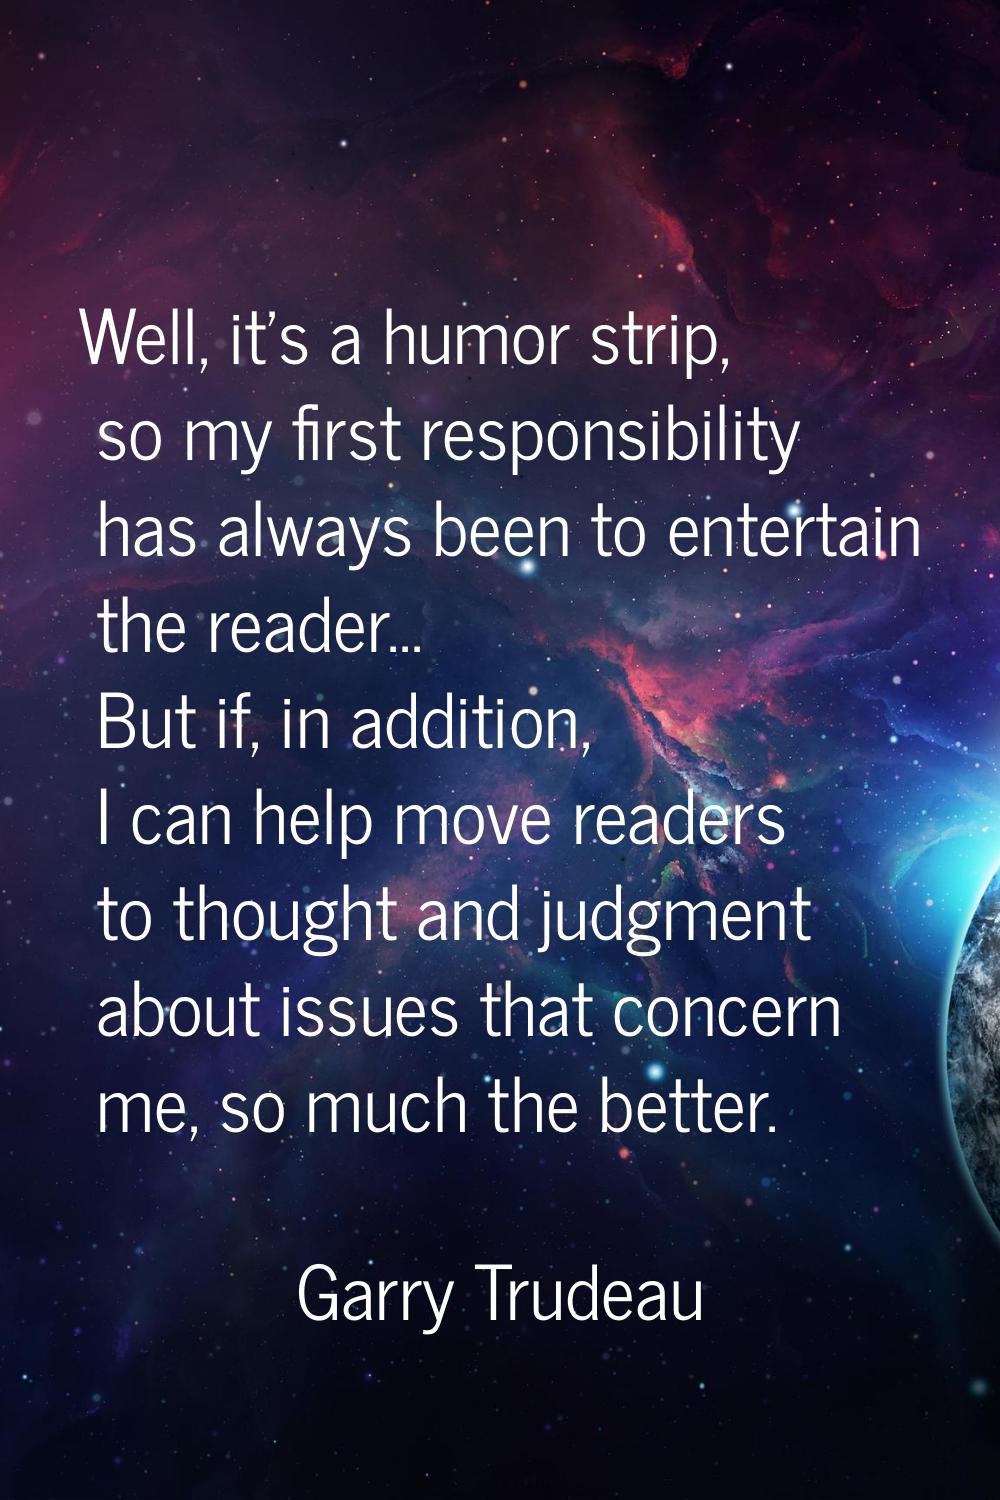 Well, it's a humor strip, so my first responsibility has always been to entertain the reader... But